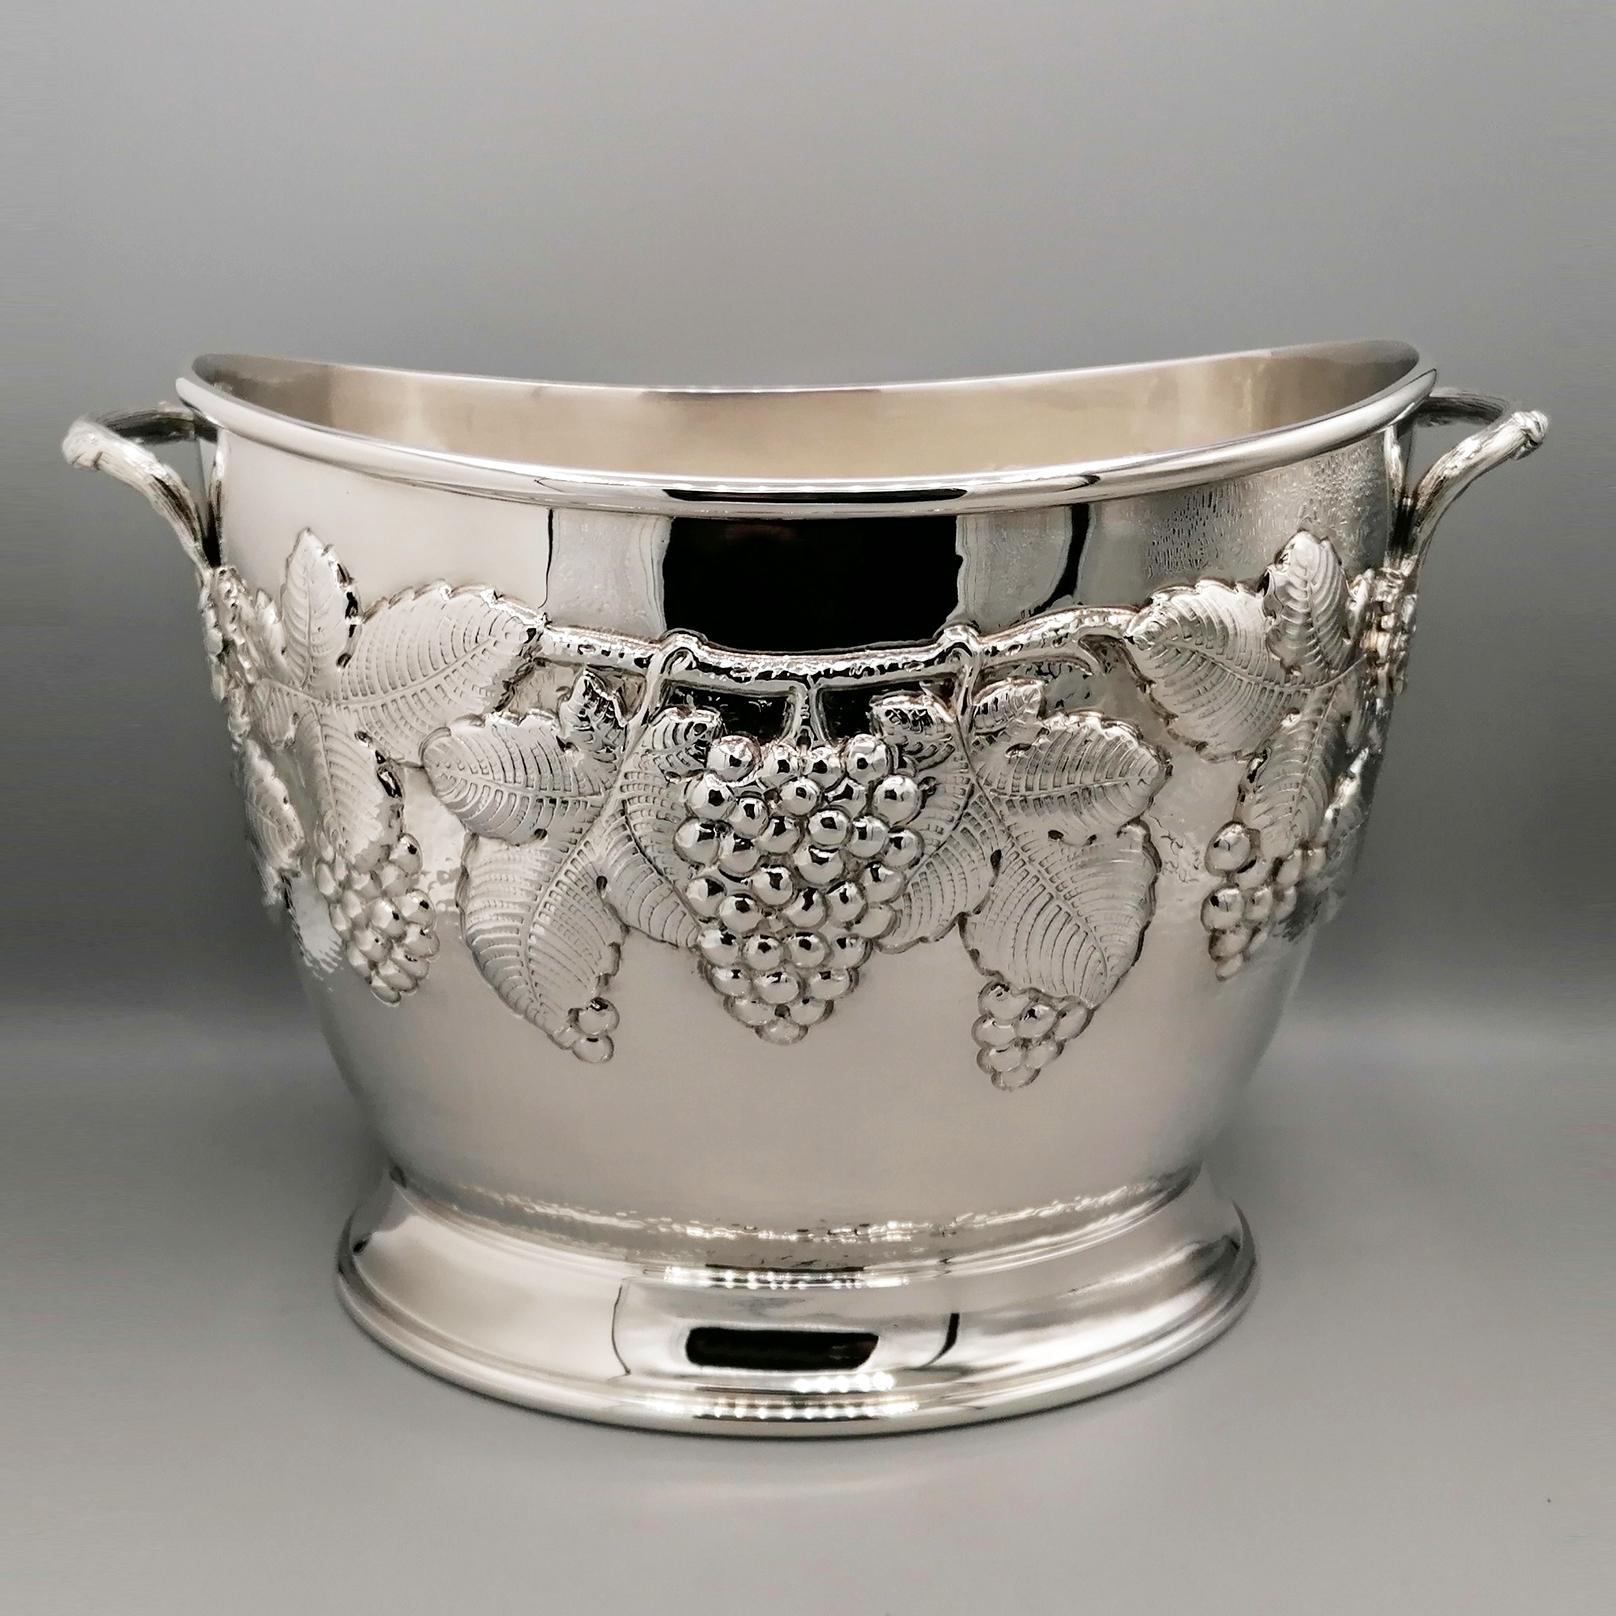 Oval champagne bucket for 2 bottles in solid silver.
The oval body was embossed with a vine shoot design with bunches and grape leaves and subsequently finished with a perfect engraving work to highlight the various details.
Below the embossment,